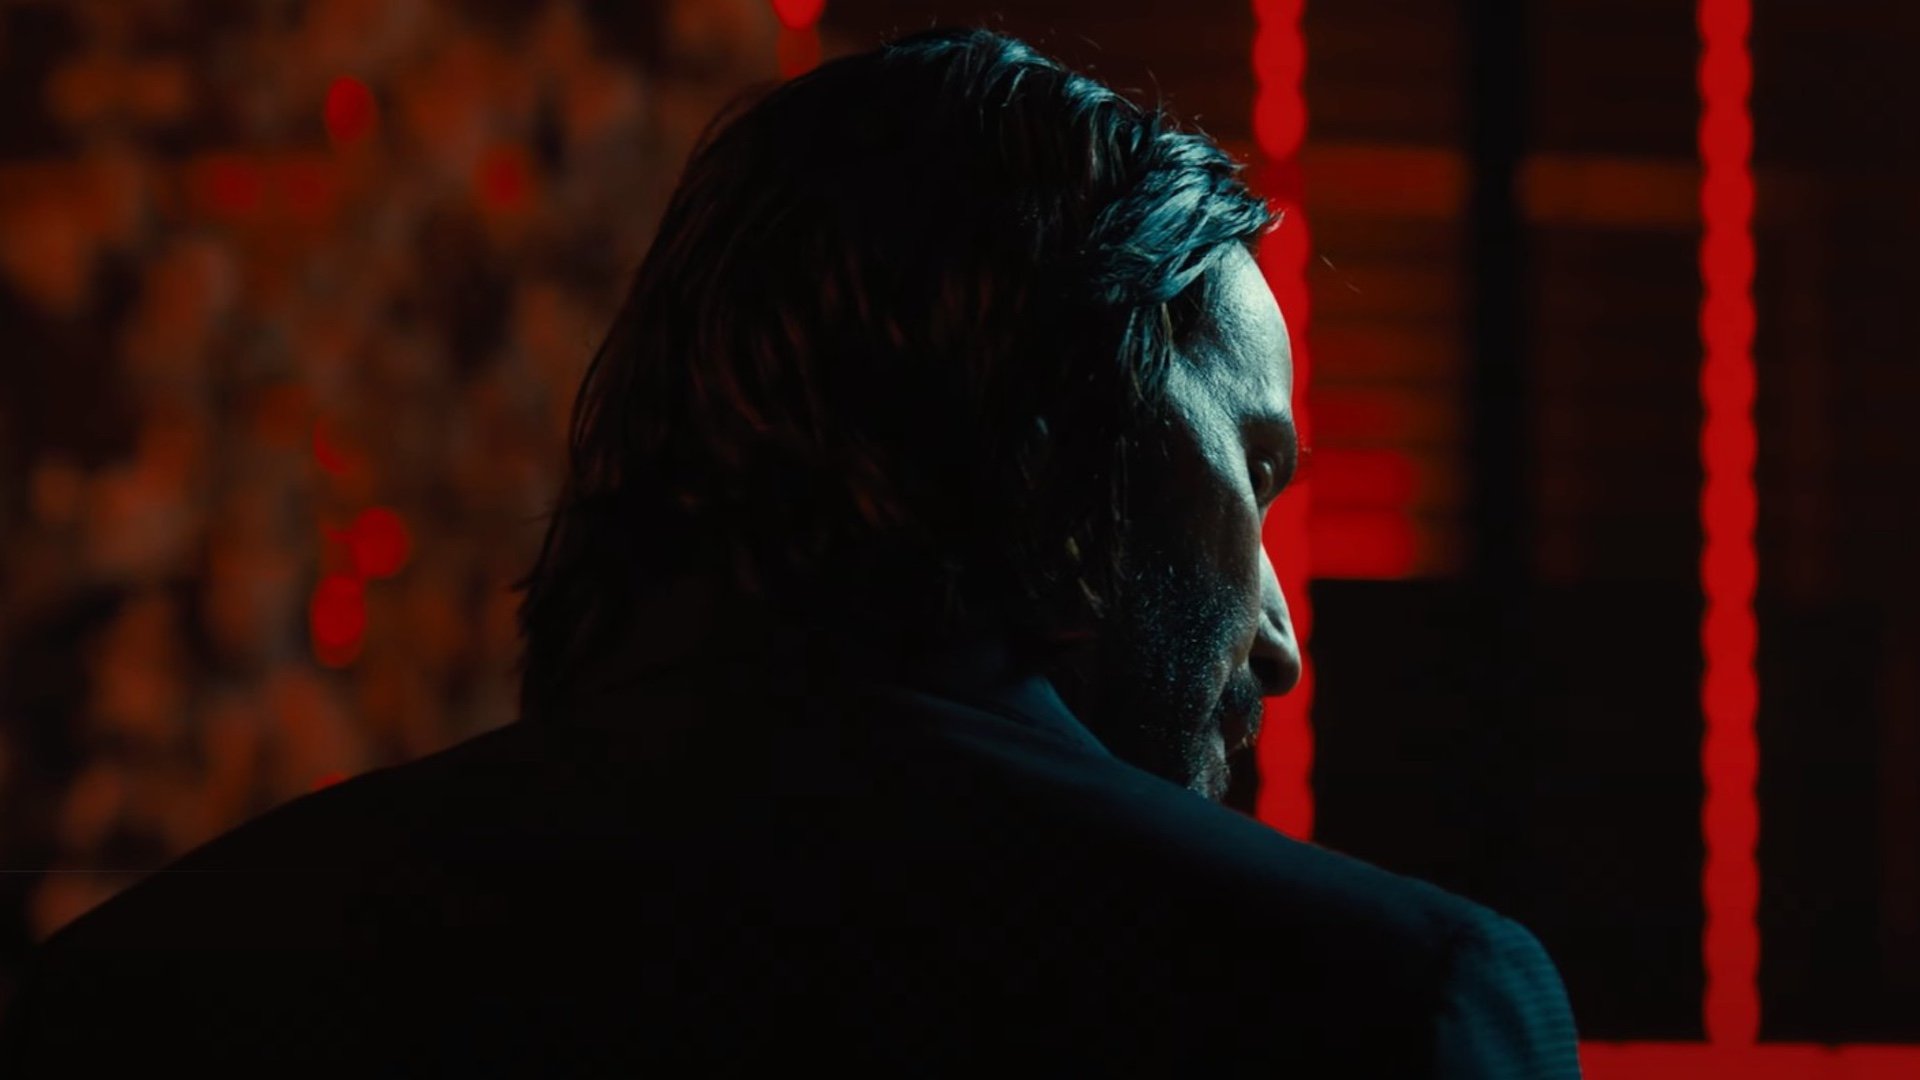 The director of the John Wick series already has ideas all the way